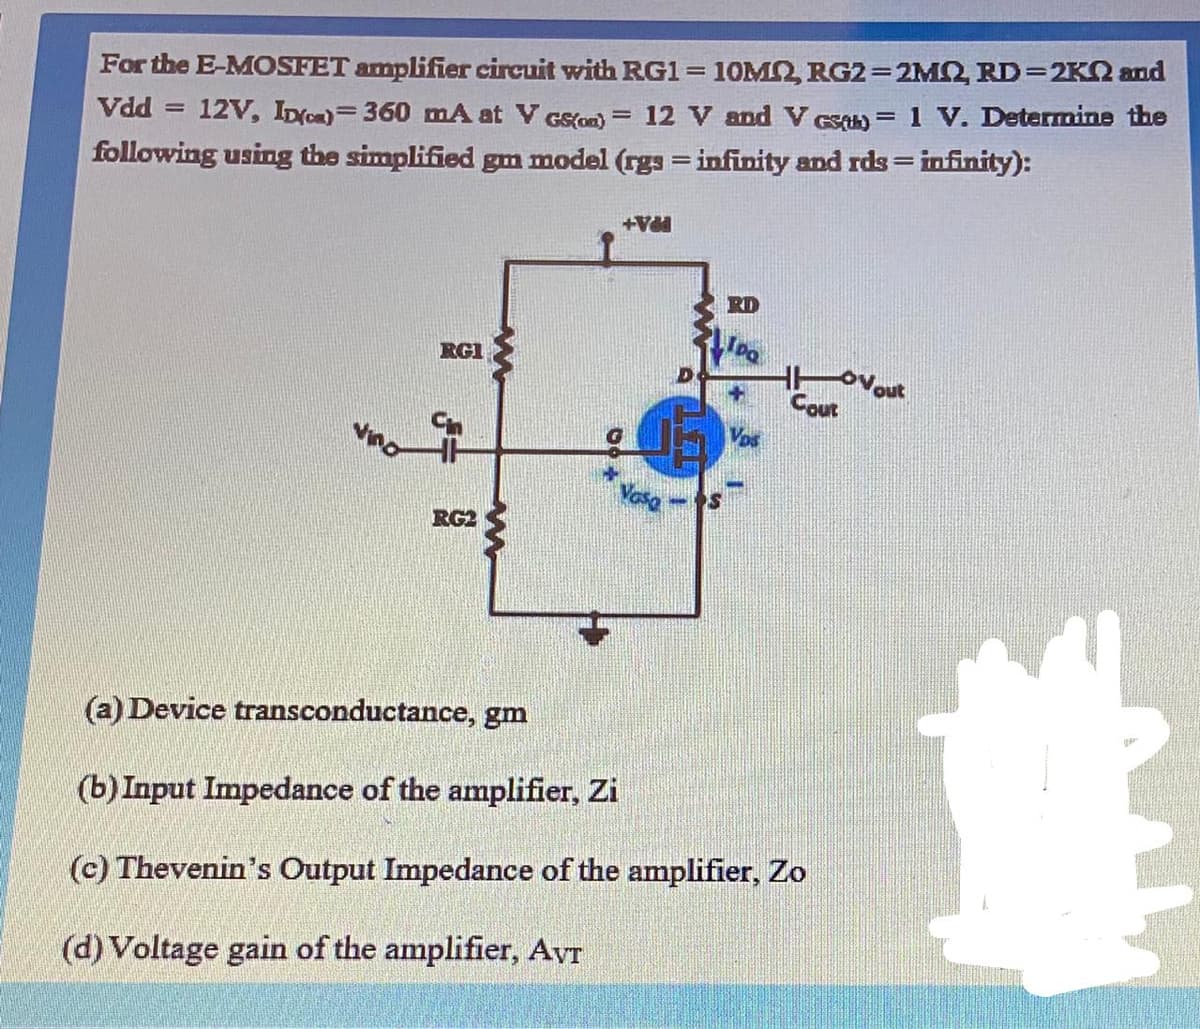 For the E-MOSFET amplifier circuit with RG1= 10M2, RG2=2M2, RD=2K2 and
1 V. Determine the
||
Vdd = 12V, IDo)=360 mA at V GS(on) = 12 V and V eS)
following using the simplified gm model (rgs = infinity and rds= infinity):
PPA+
RD
RGI
Cout
Vos
Vasa
RG2
(a) Device transconductance, gm
(b) Input Impedance of the amplifier, Zi
(c) Thevenin's Output Impedance of the amplifier, Zo
(d) Voltage gain of the amplifier, Avr
